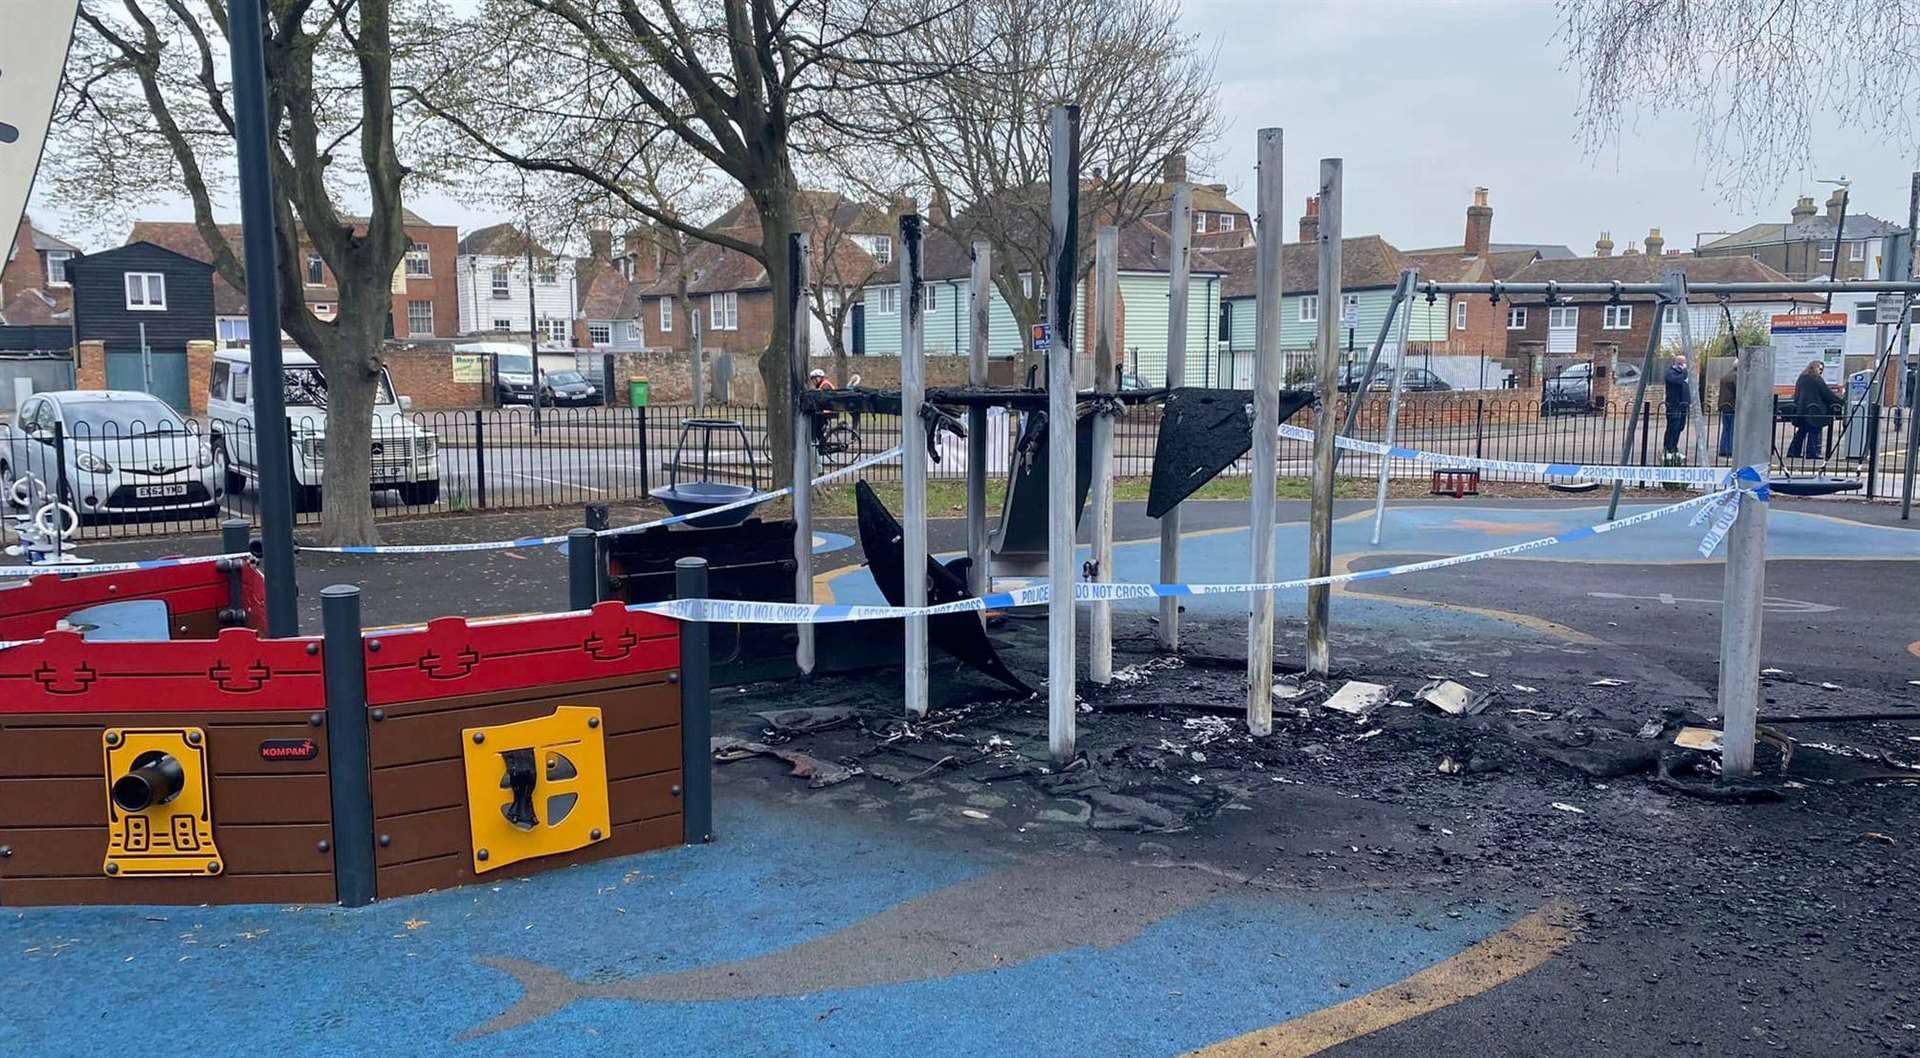 Play equipment was set on fire in Cross Lane in March 2022. Picture: Faversham Pools